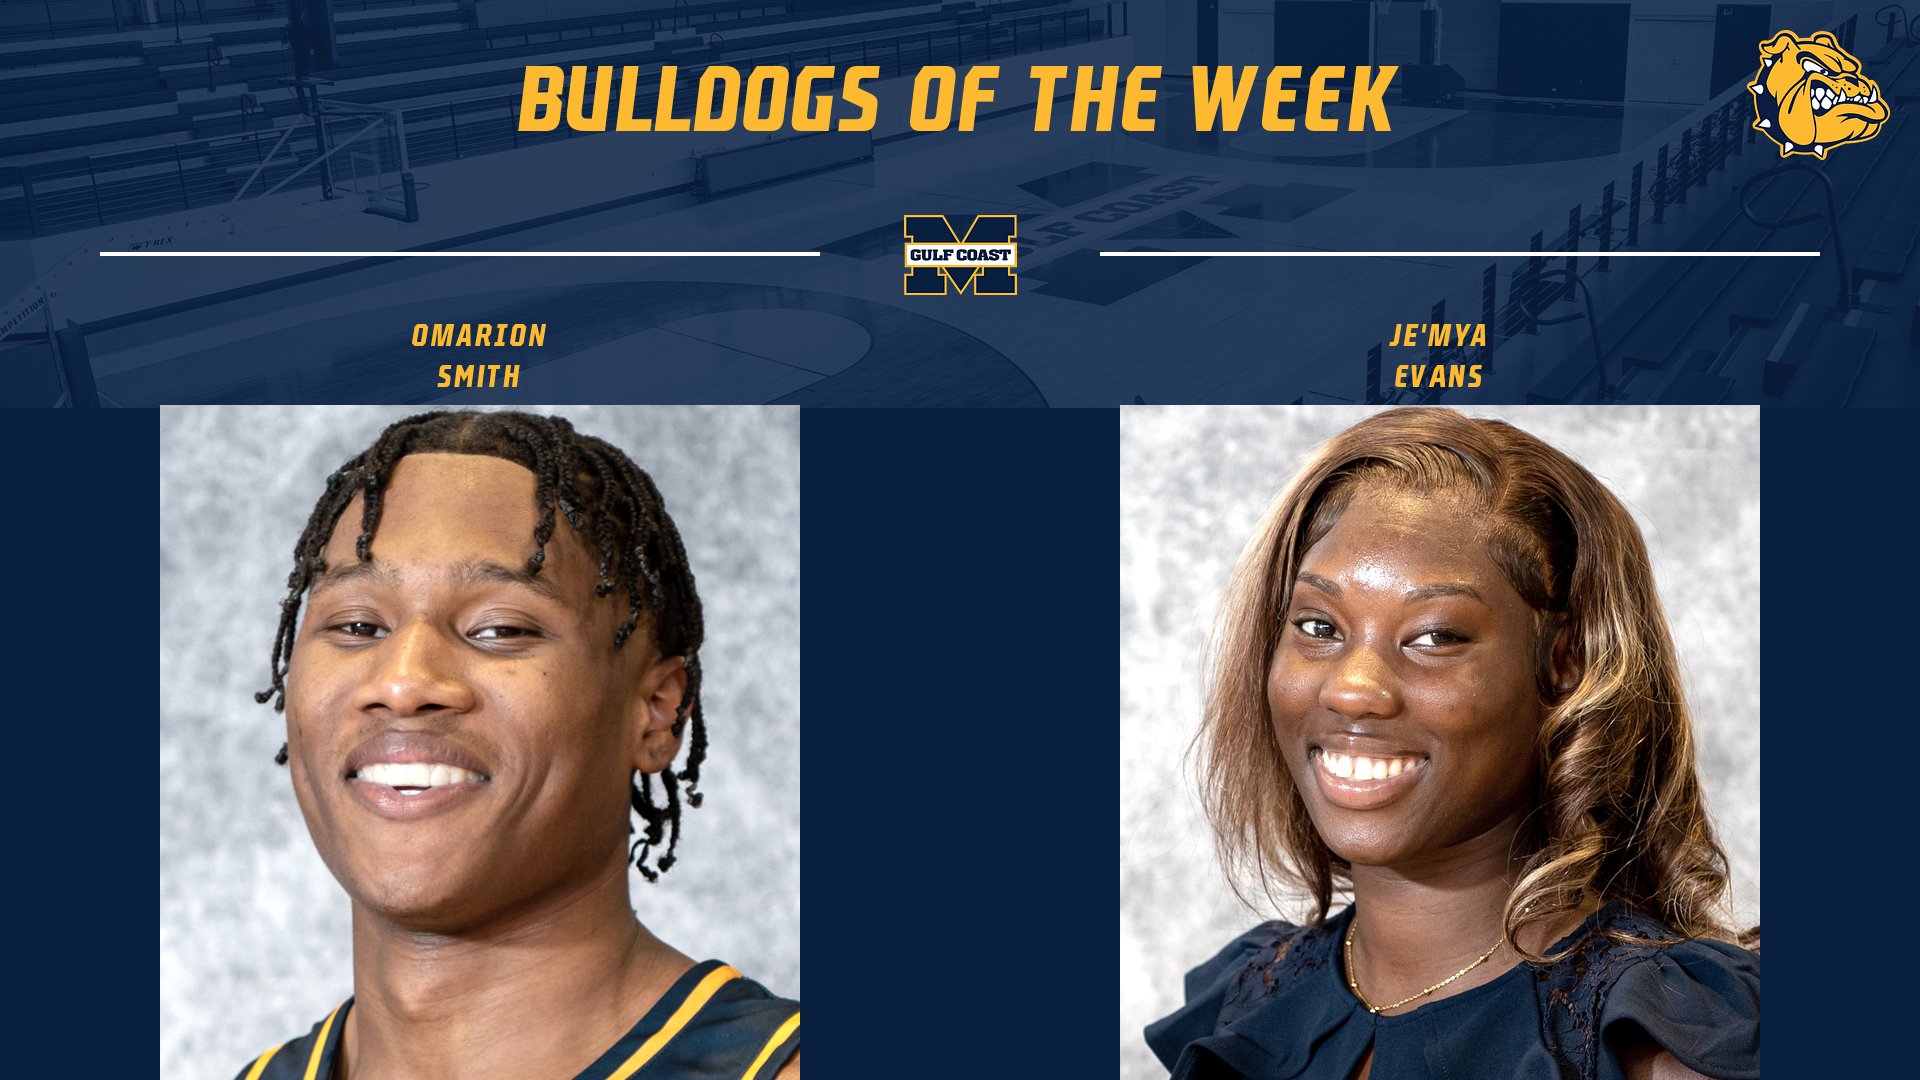 Smith, Evans named Bulldogs of the Week